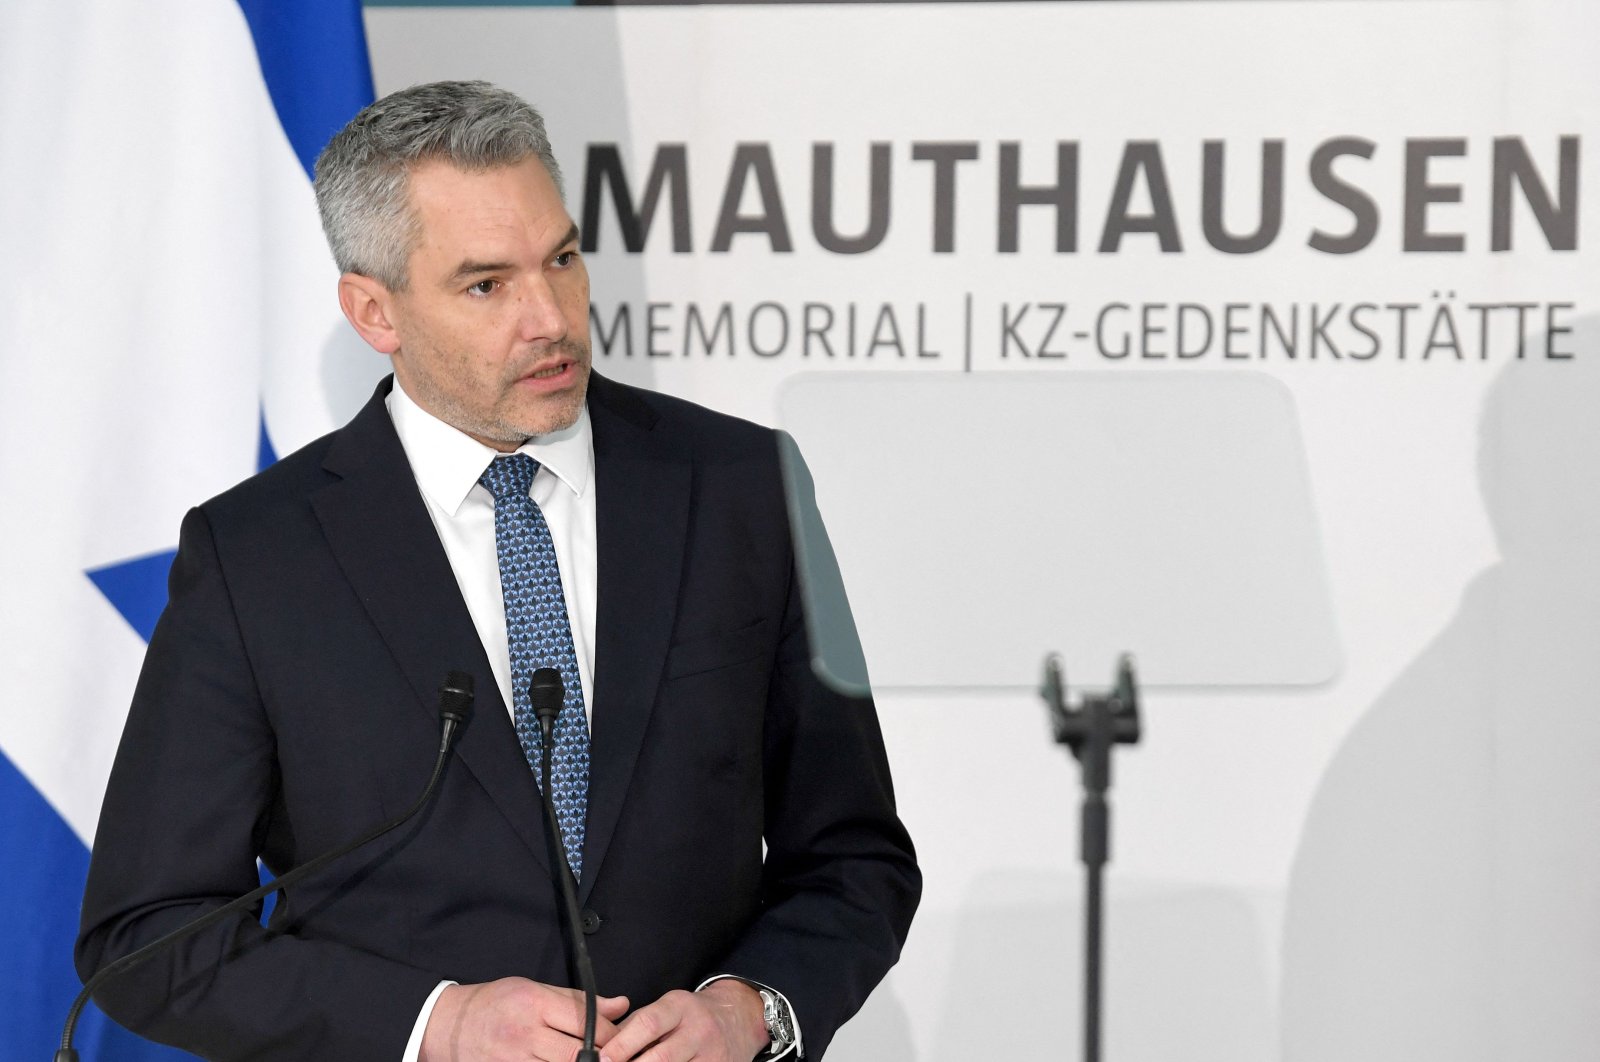 Austria&#039;s Chancellor Karl Nehammer speaks during a commemoration ceremony at the Mauthausen Memorial, a former Nazi concentration camp, on International Holocaust Remembrance Day, in Mauthausen, Austria, Jan. 27, 2022. (AFP Photo)